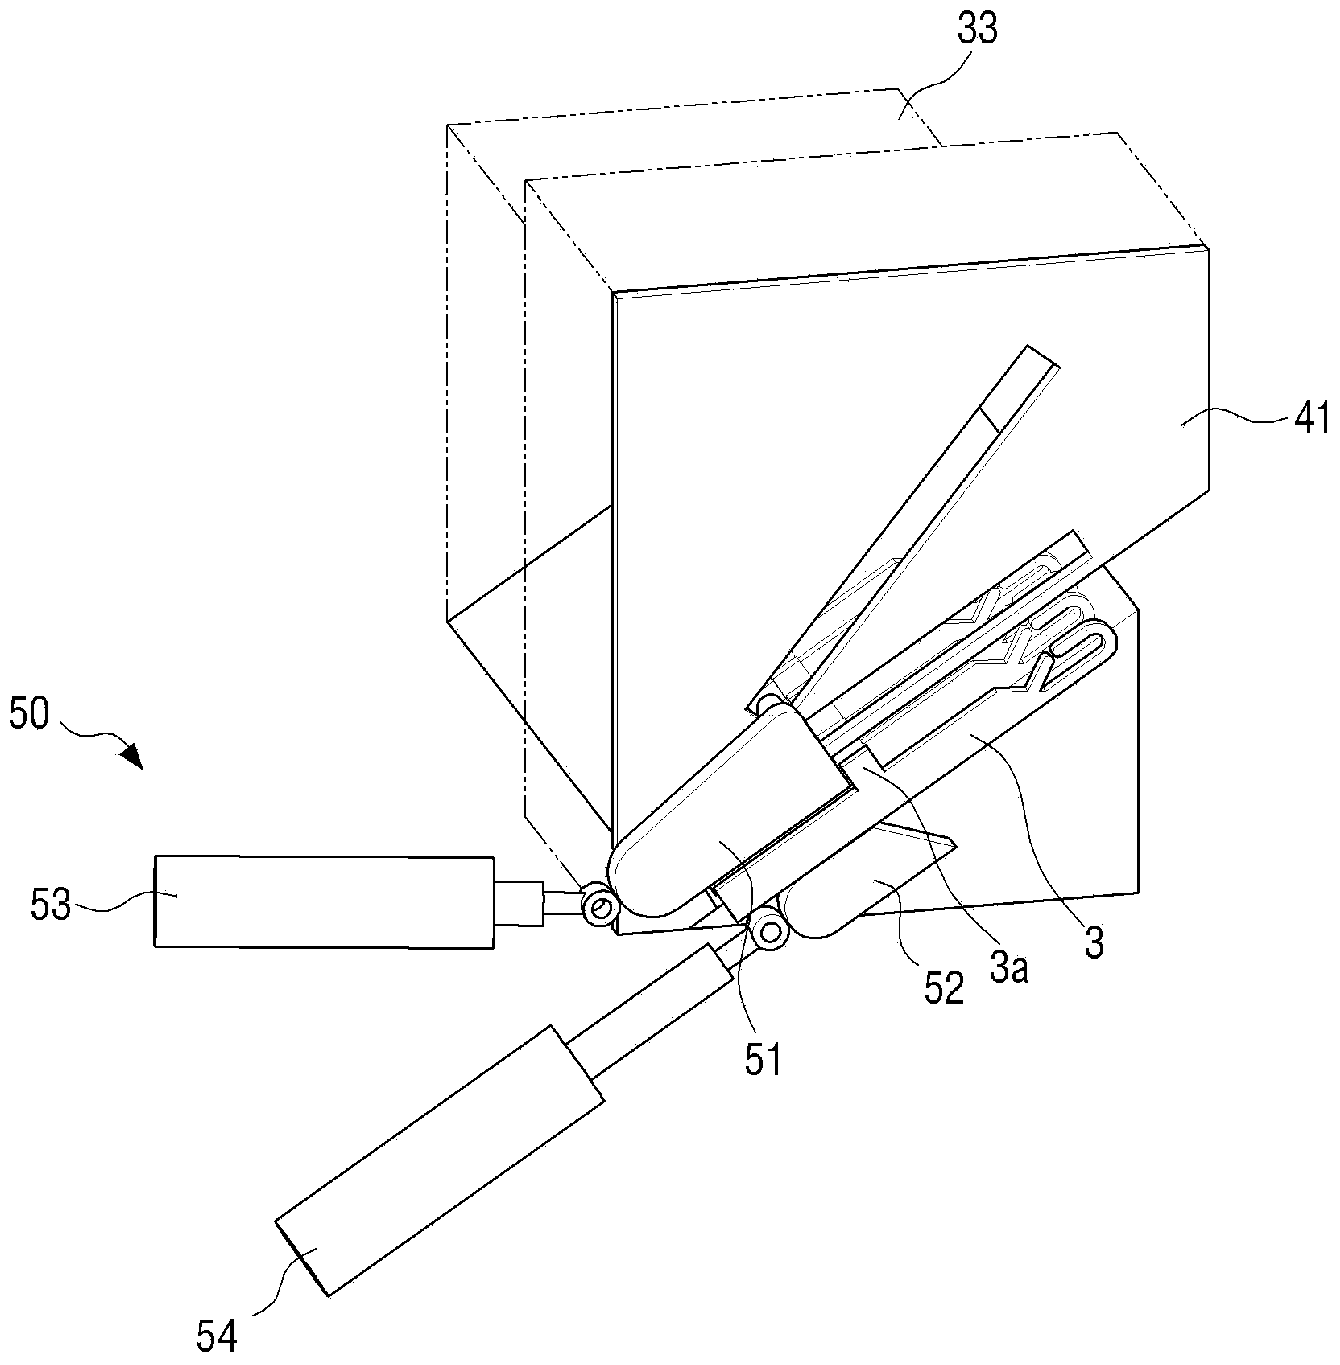 Needle insertion apparatus for a knitting machine